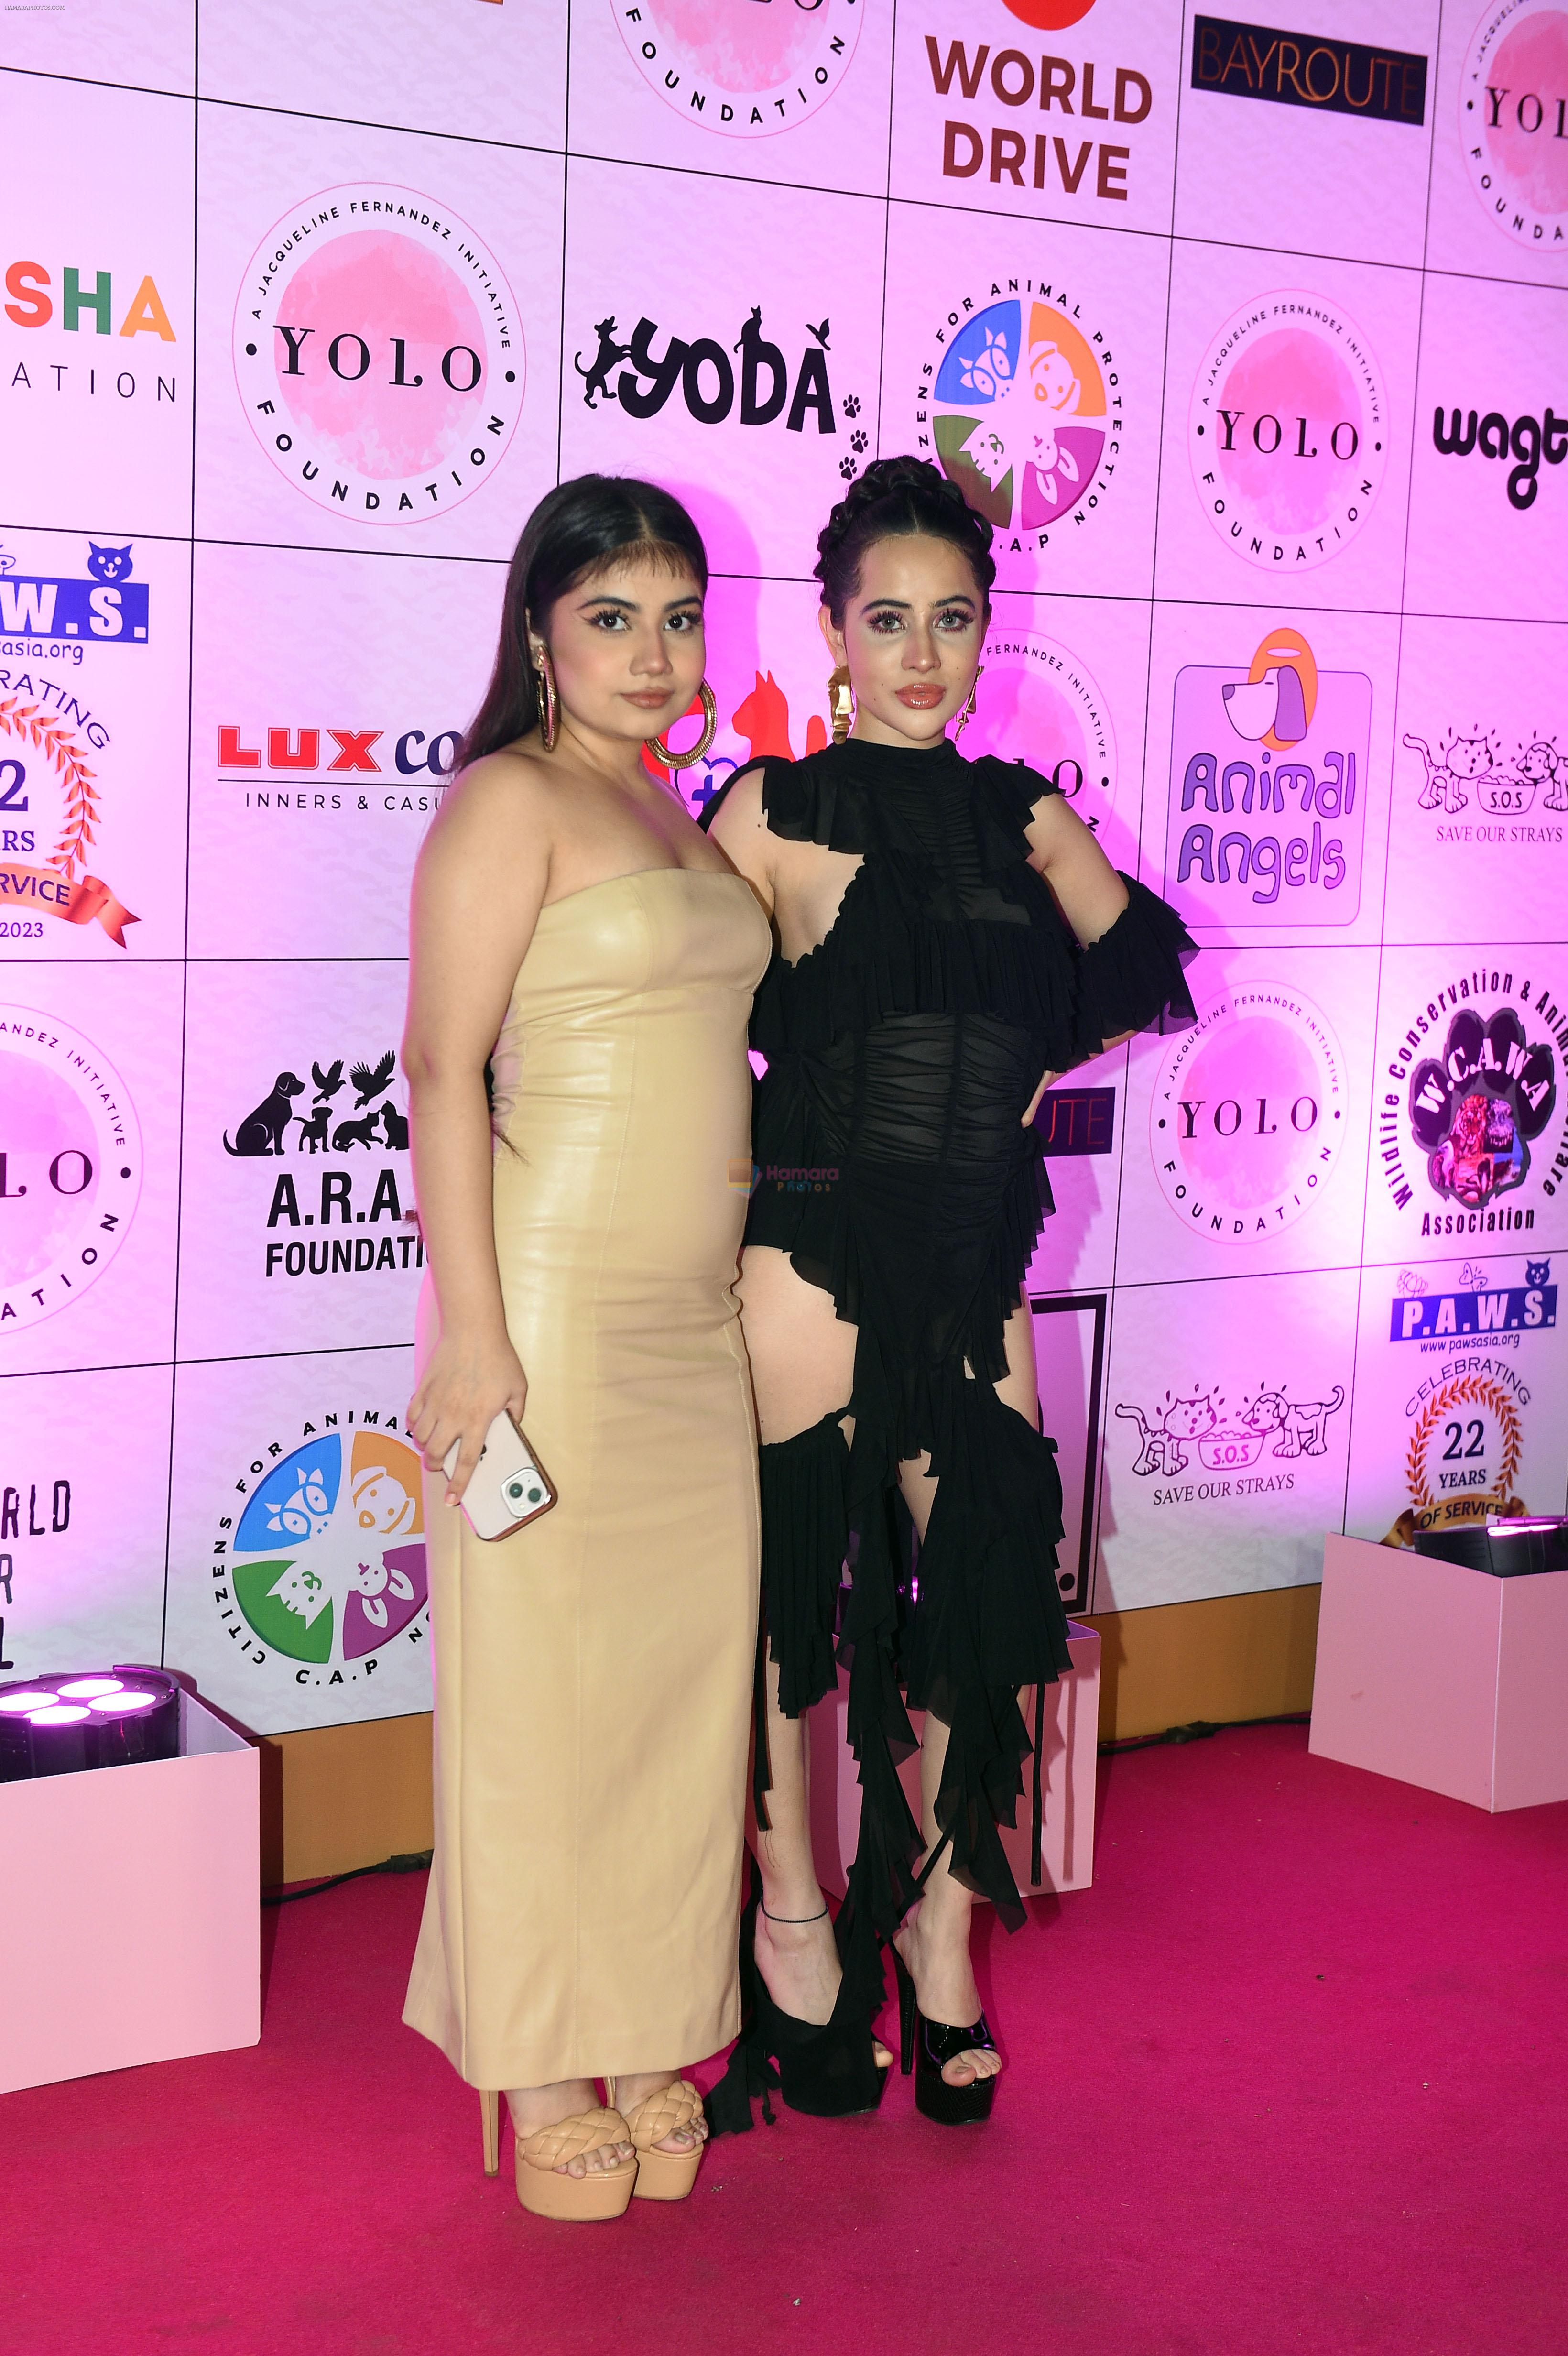 Urfi Javed and Asfi Javed at The Animal Welfare Event at Jio World Drive in Mumbai on May 19, 2023